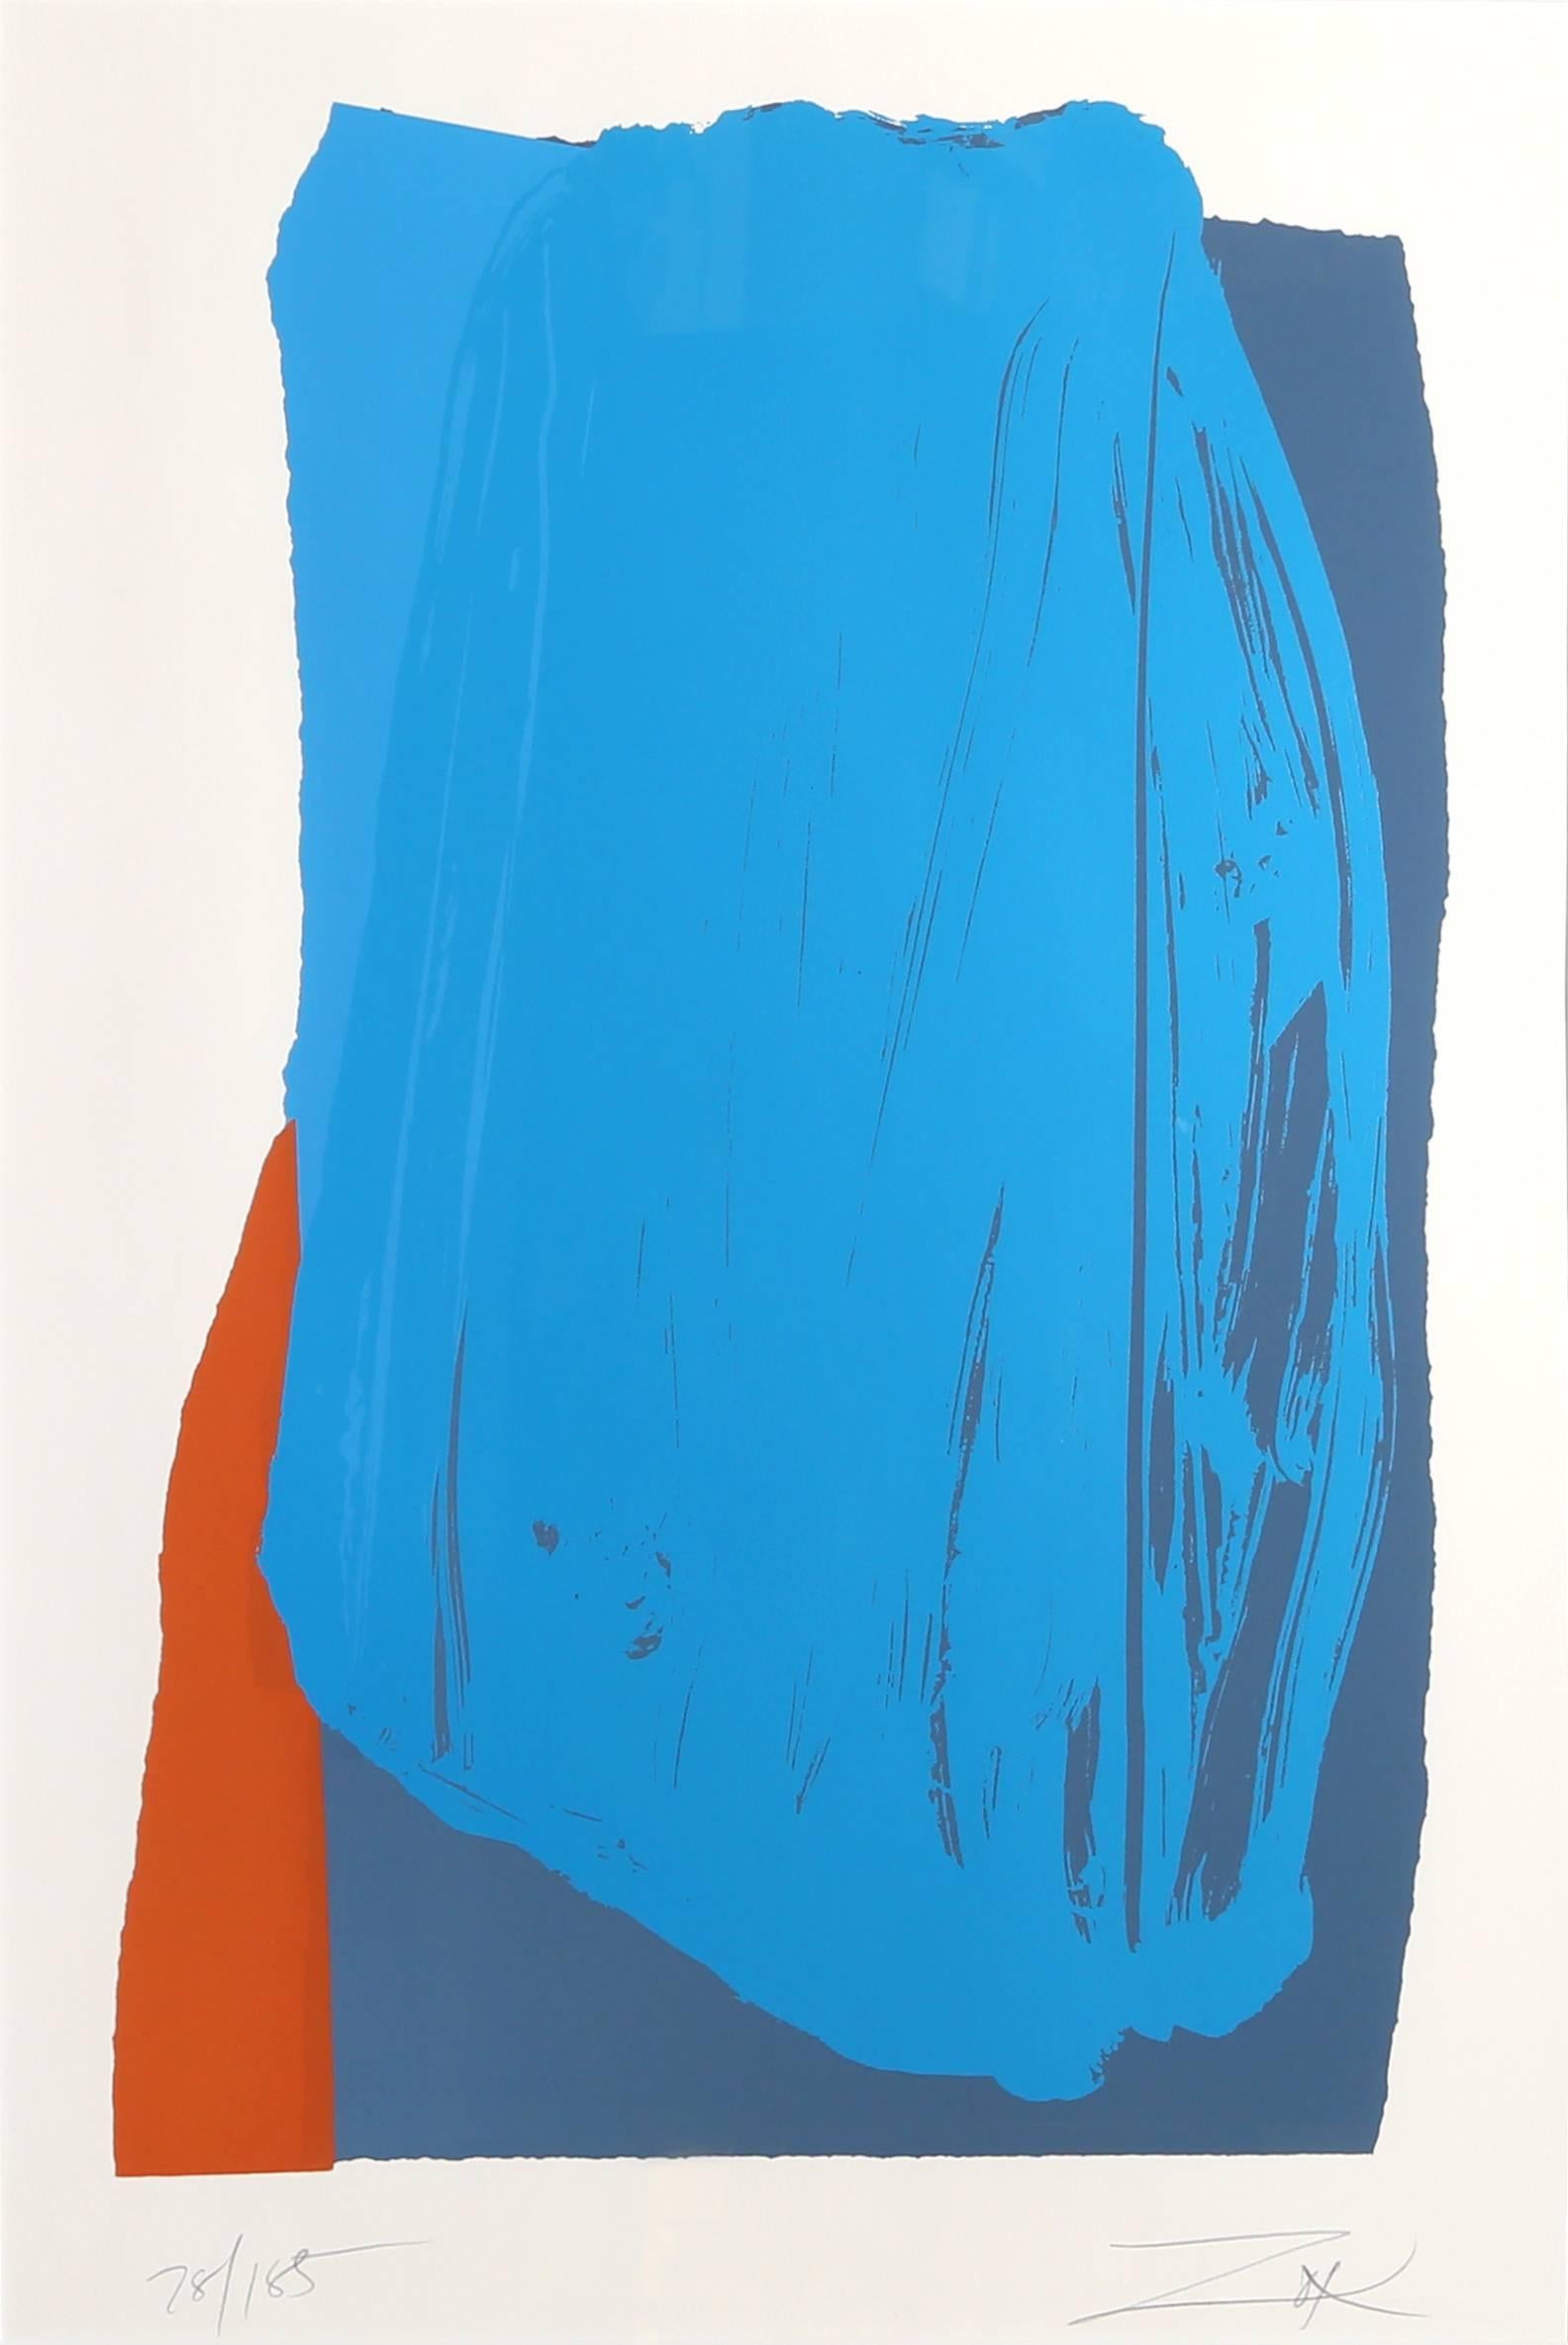 Artist: Larry Zox, American (1937 - 2006)
Title:	Moro II
Year:	1981
Medium:	Screenprint, Signed and numbered in Pencil
Edition: 185
Size:	42.5 x 30 inches